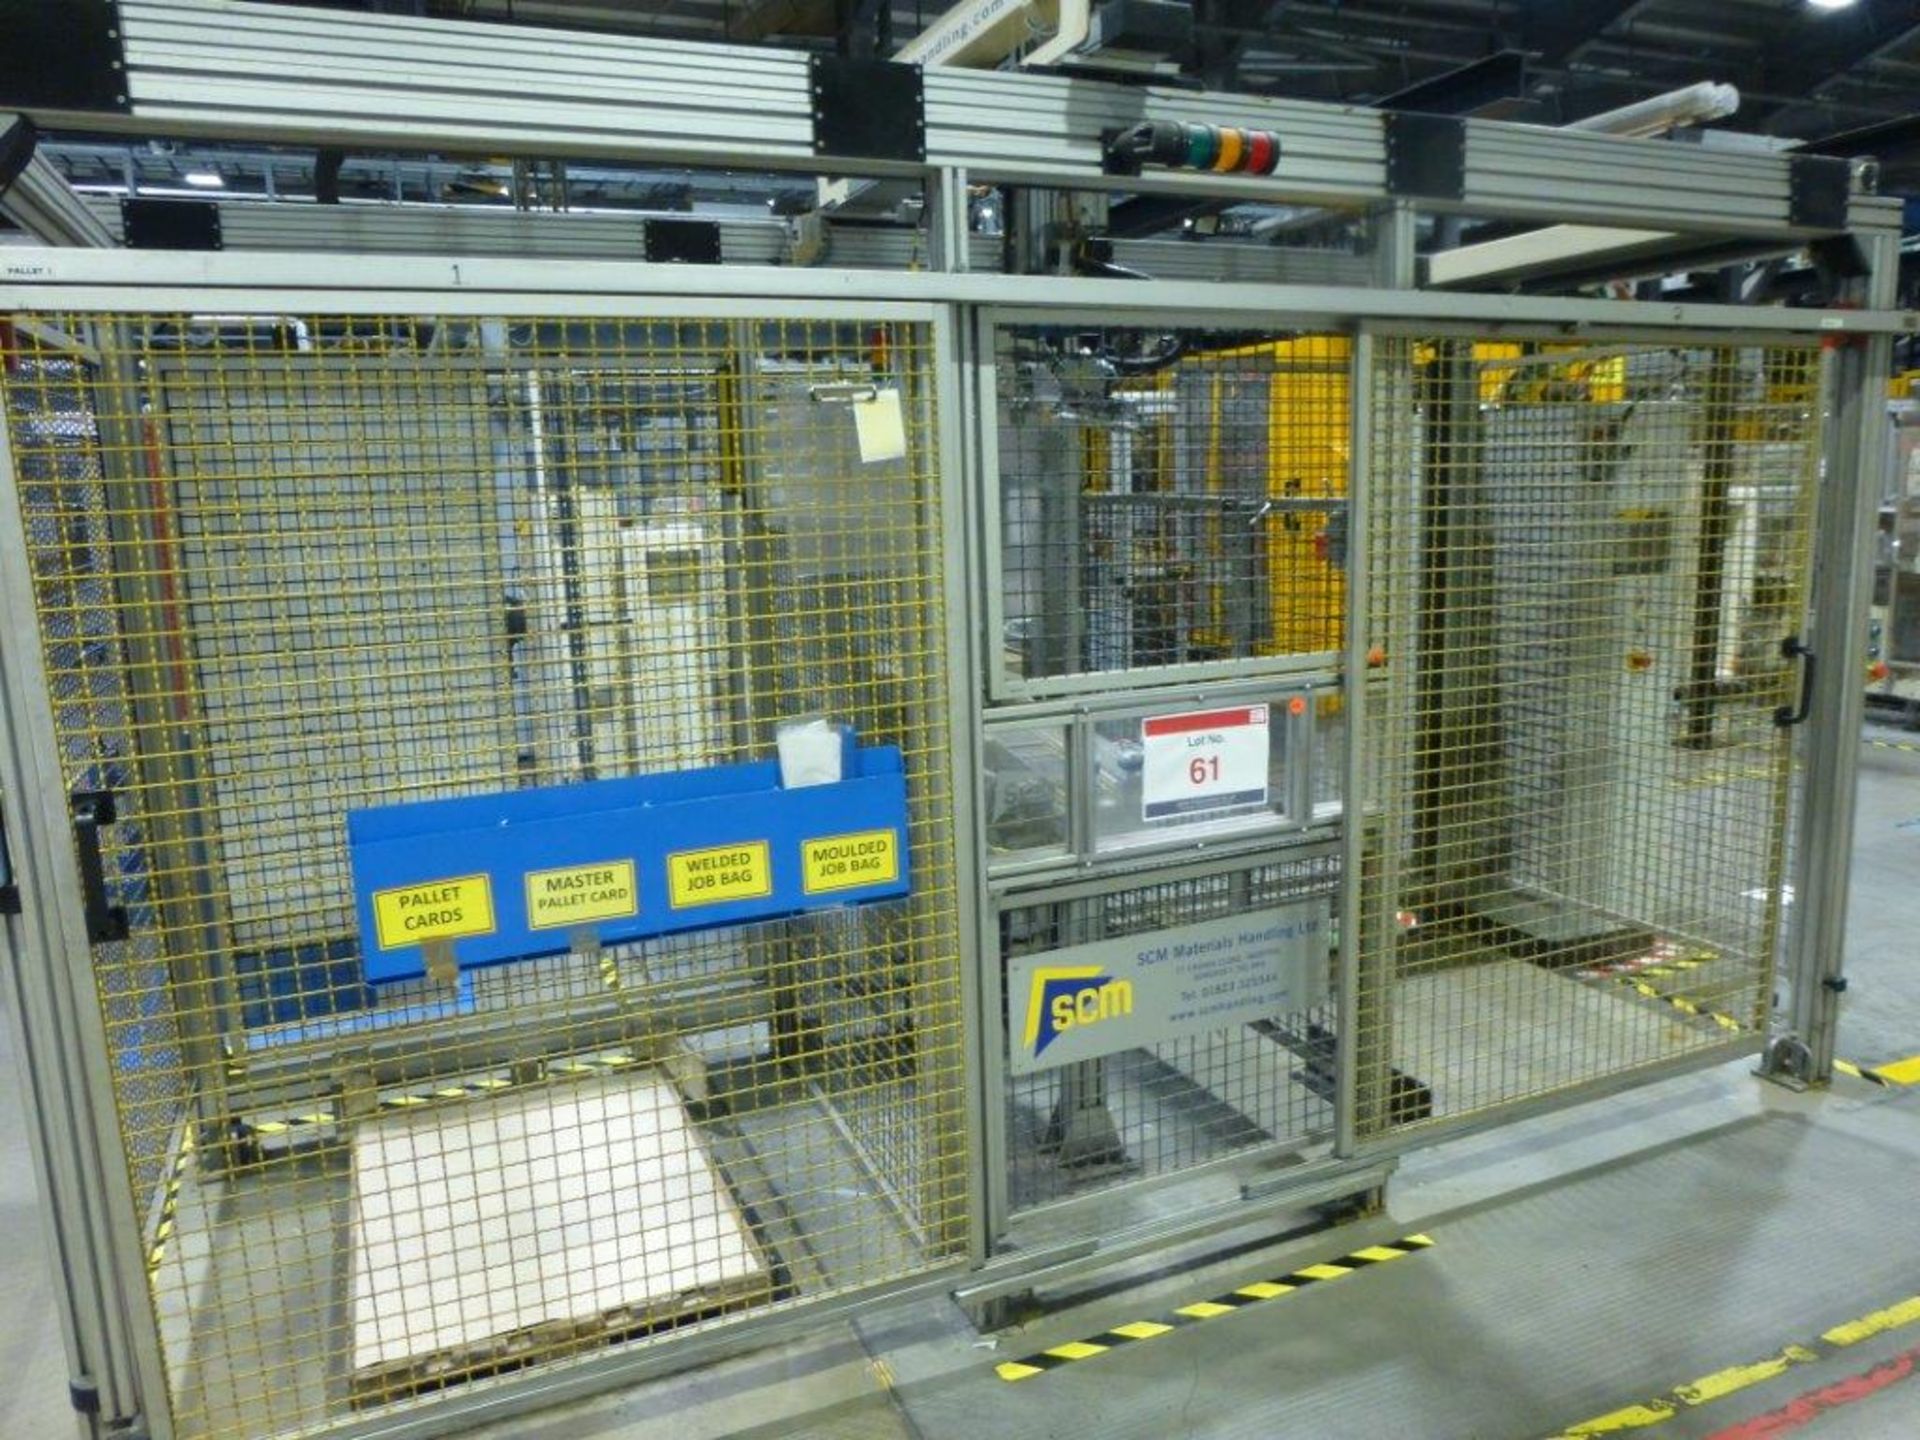 SCM Handling Twin Pallet Robot Palletiser Serial No. BC4272-SI4478-12.02-B09 with freestanding